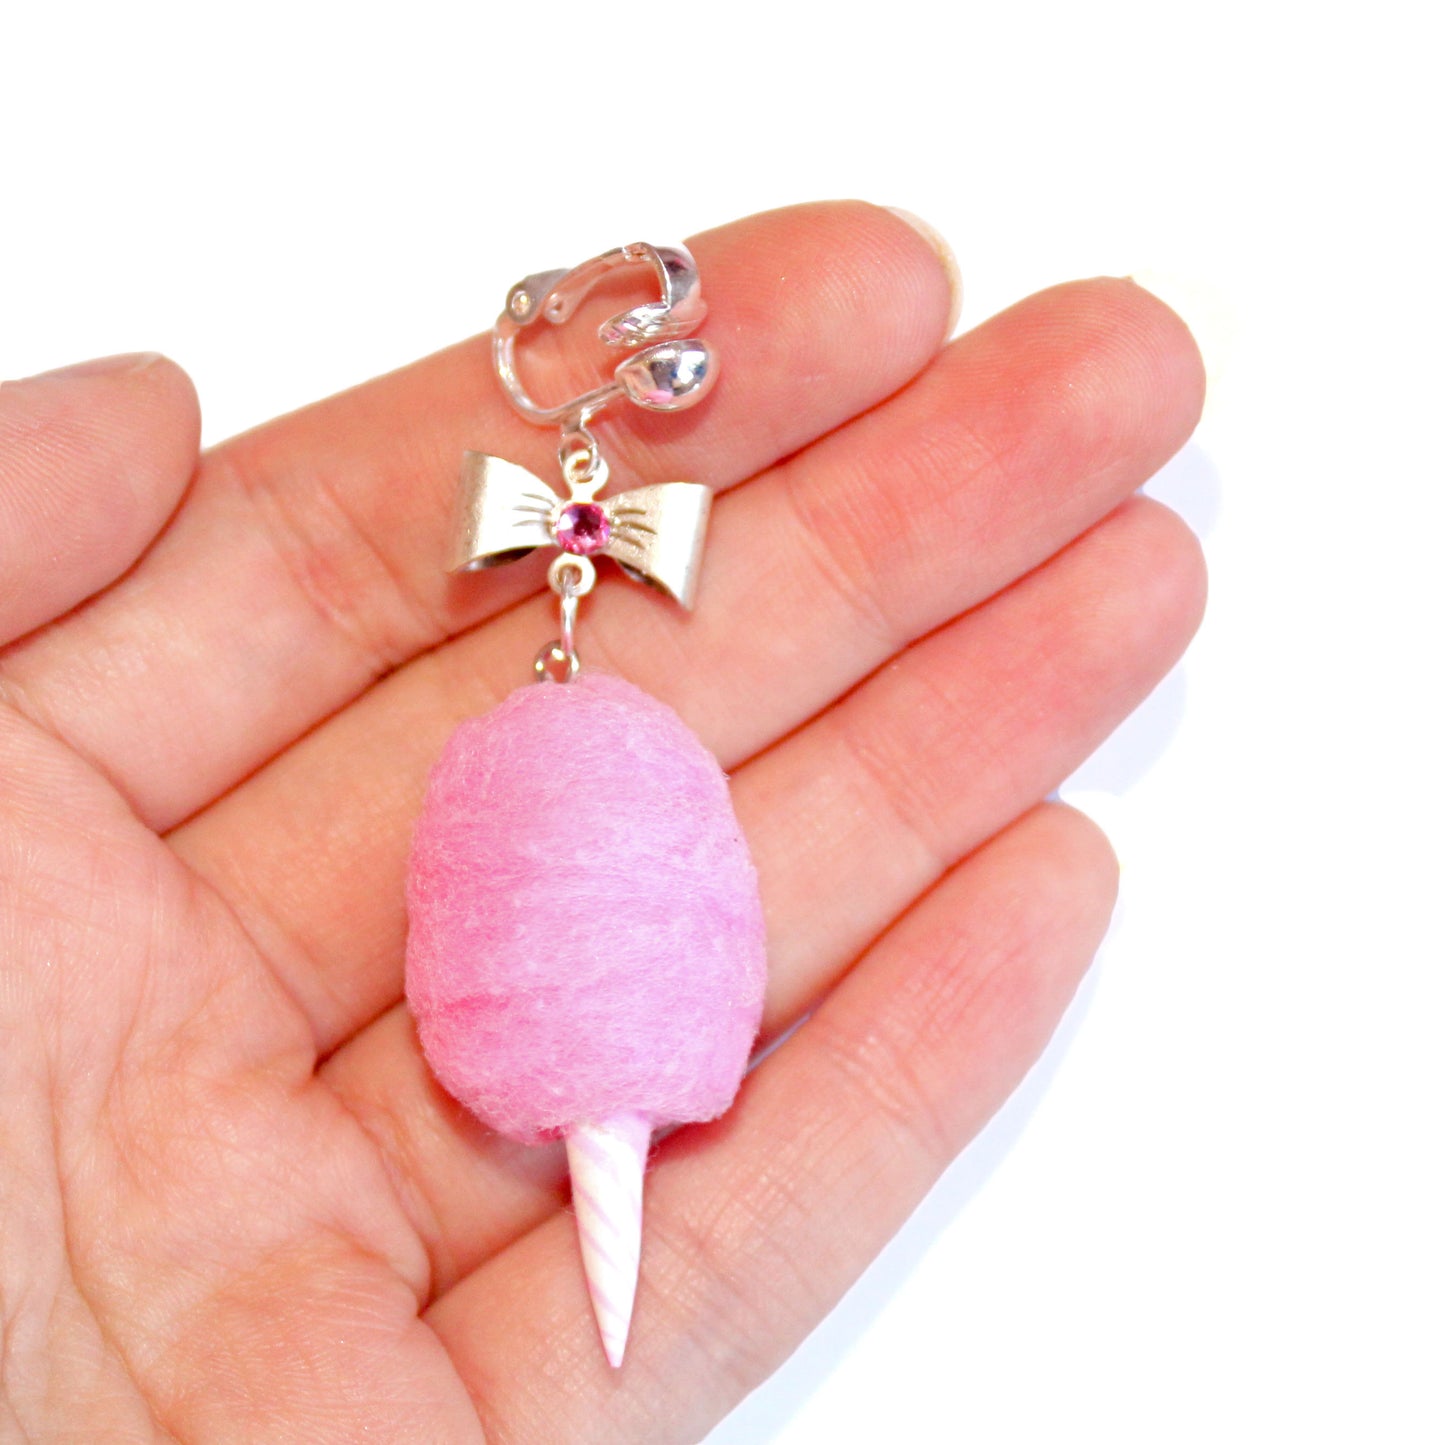 Clip-On Pink Cotton Candy Earrings - Fatally Feminine Designs